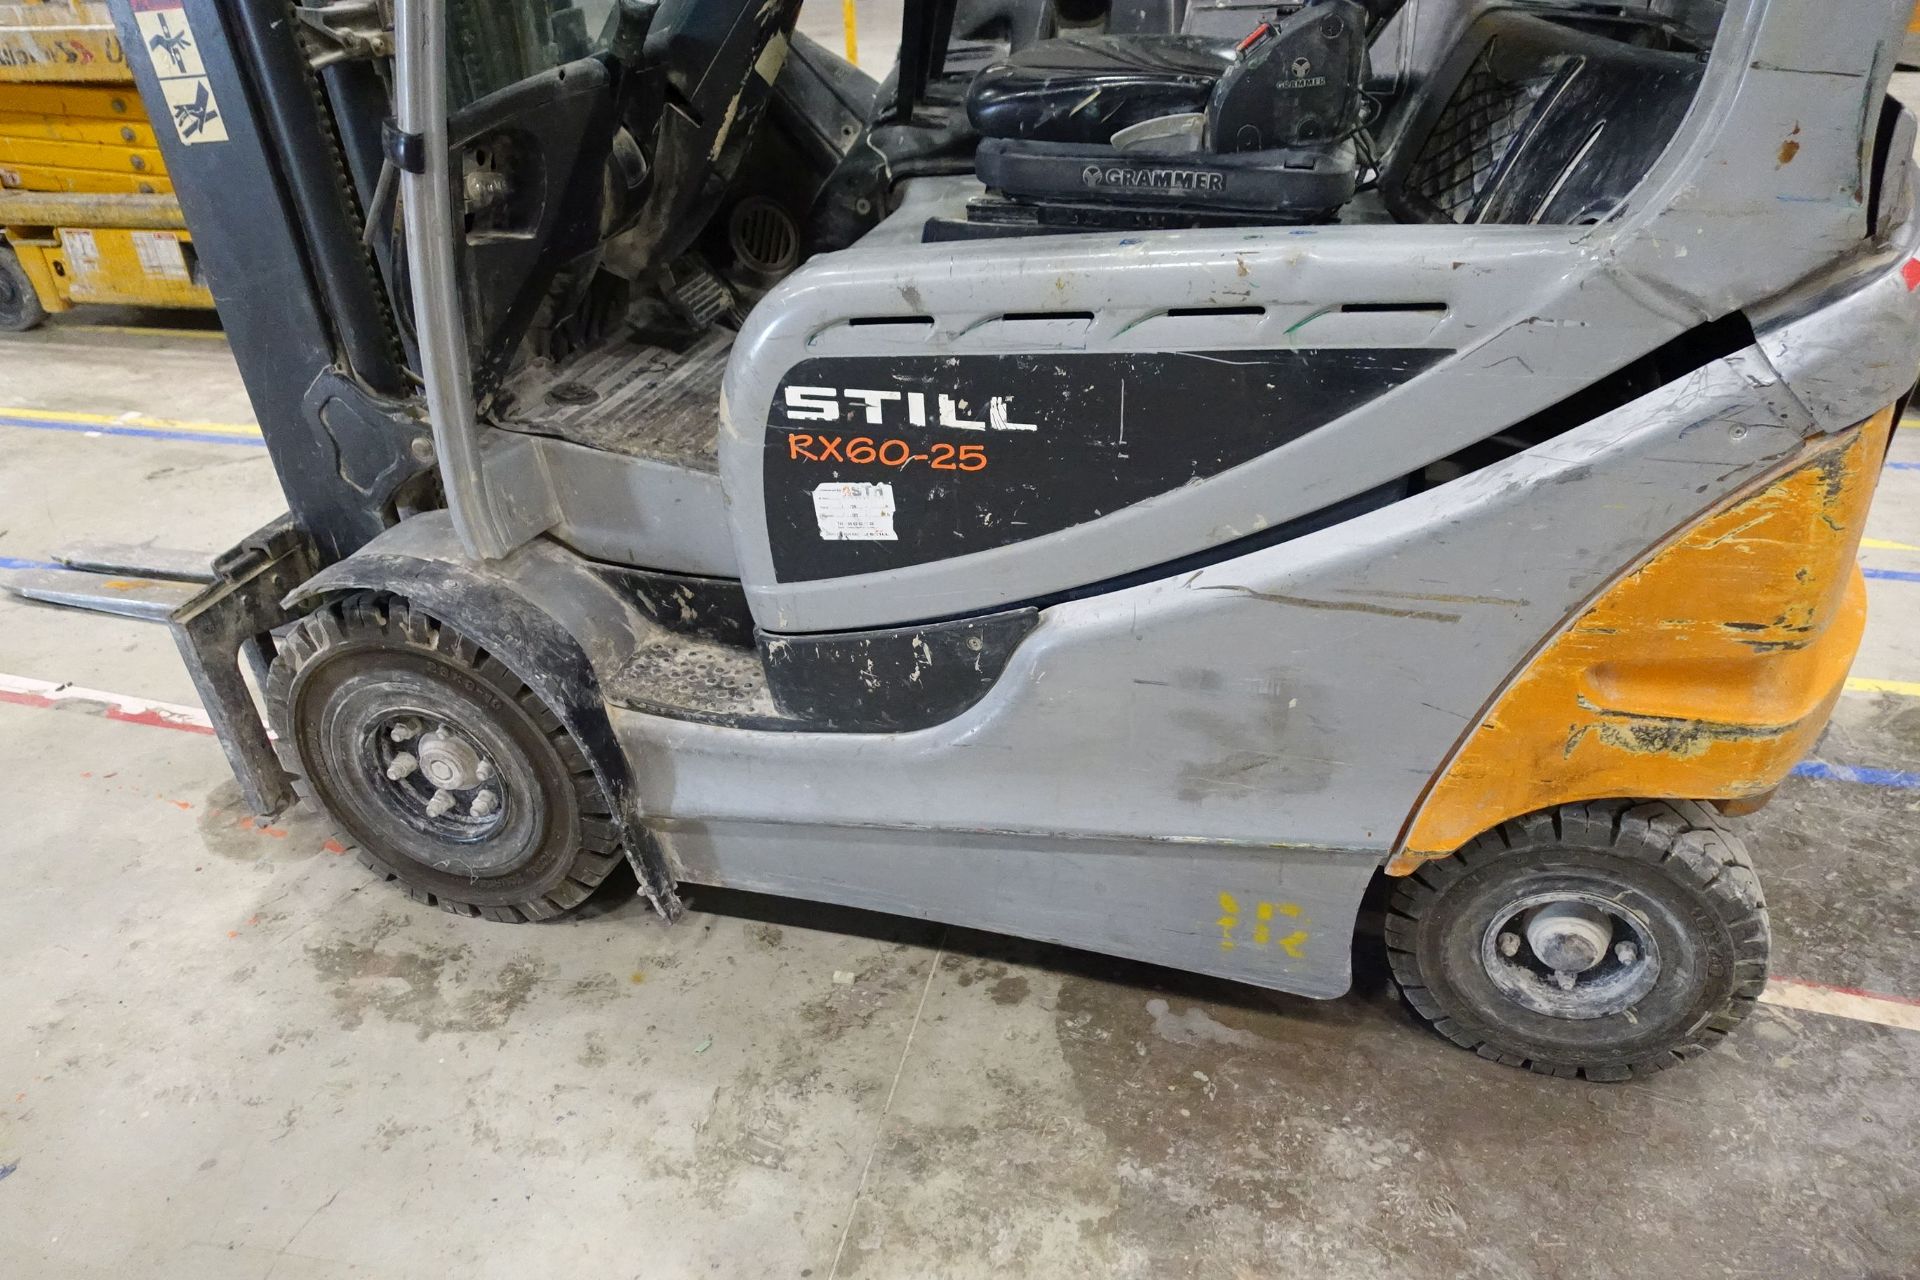 STILL RX60-25 Electric Forklift Truck, 2,500kg Capacity with Sideshift, Asset # 3000022, Ser # - Image 37 of 52